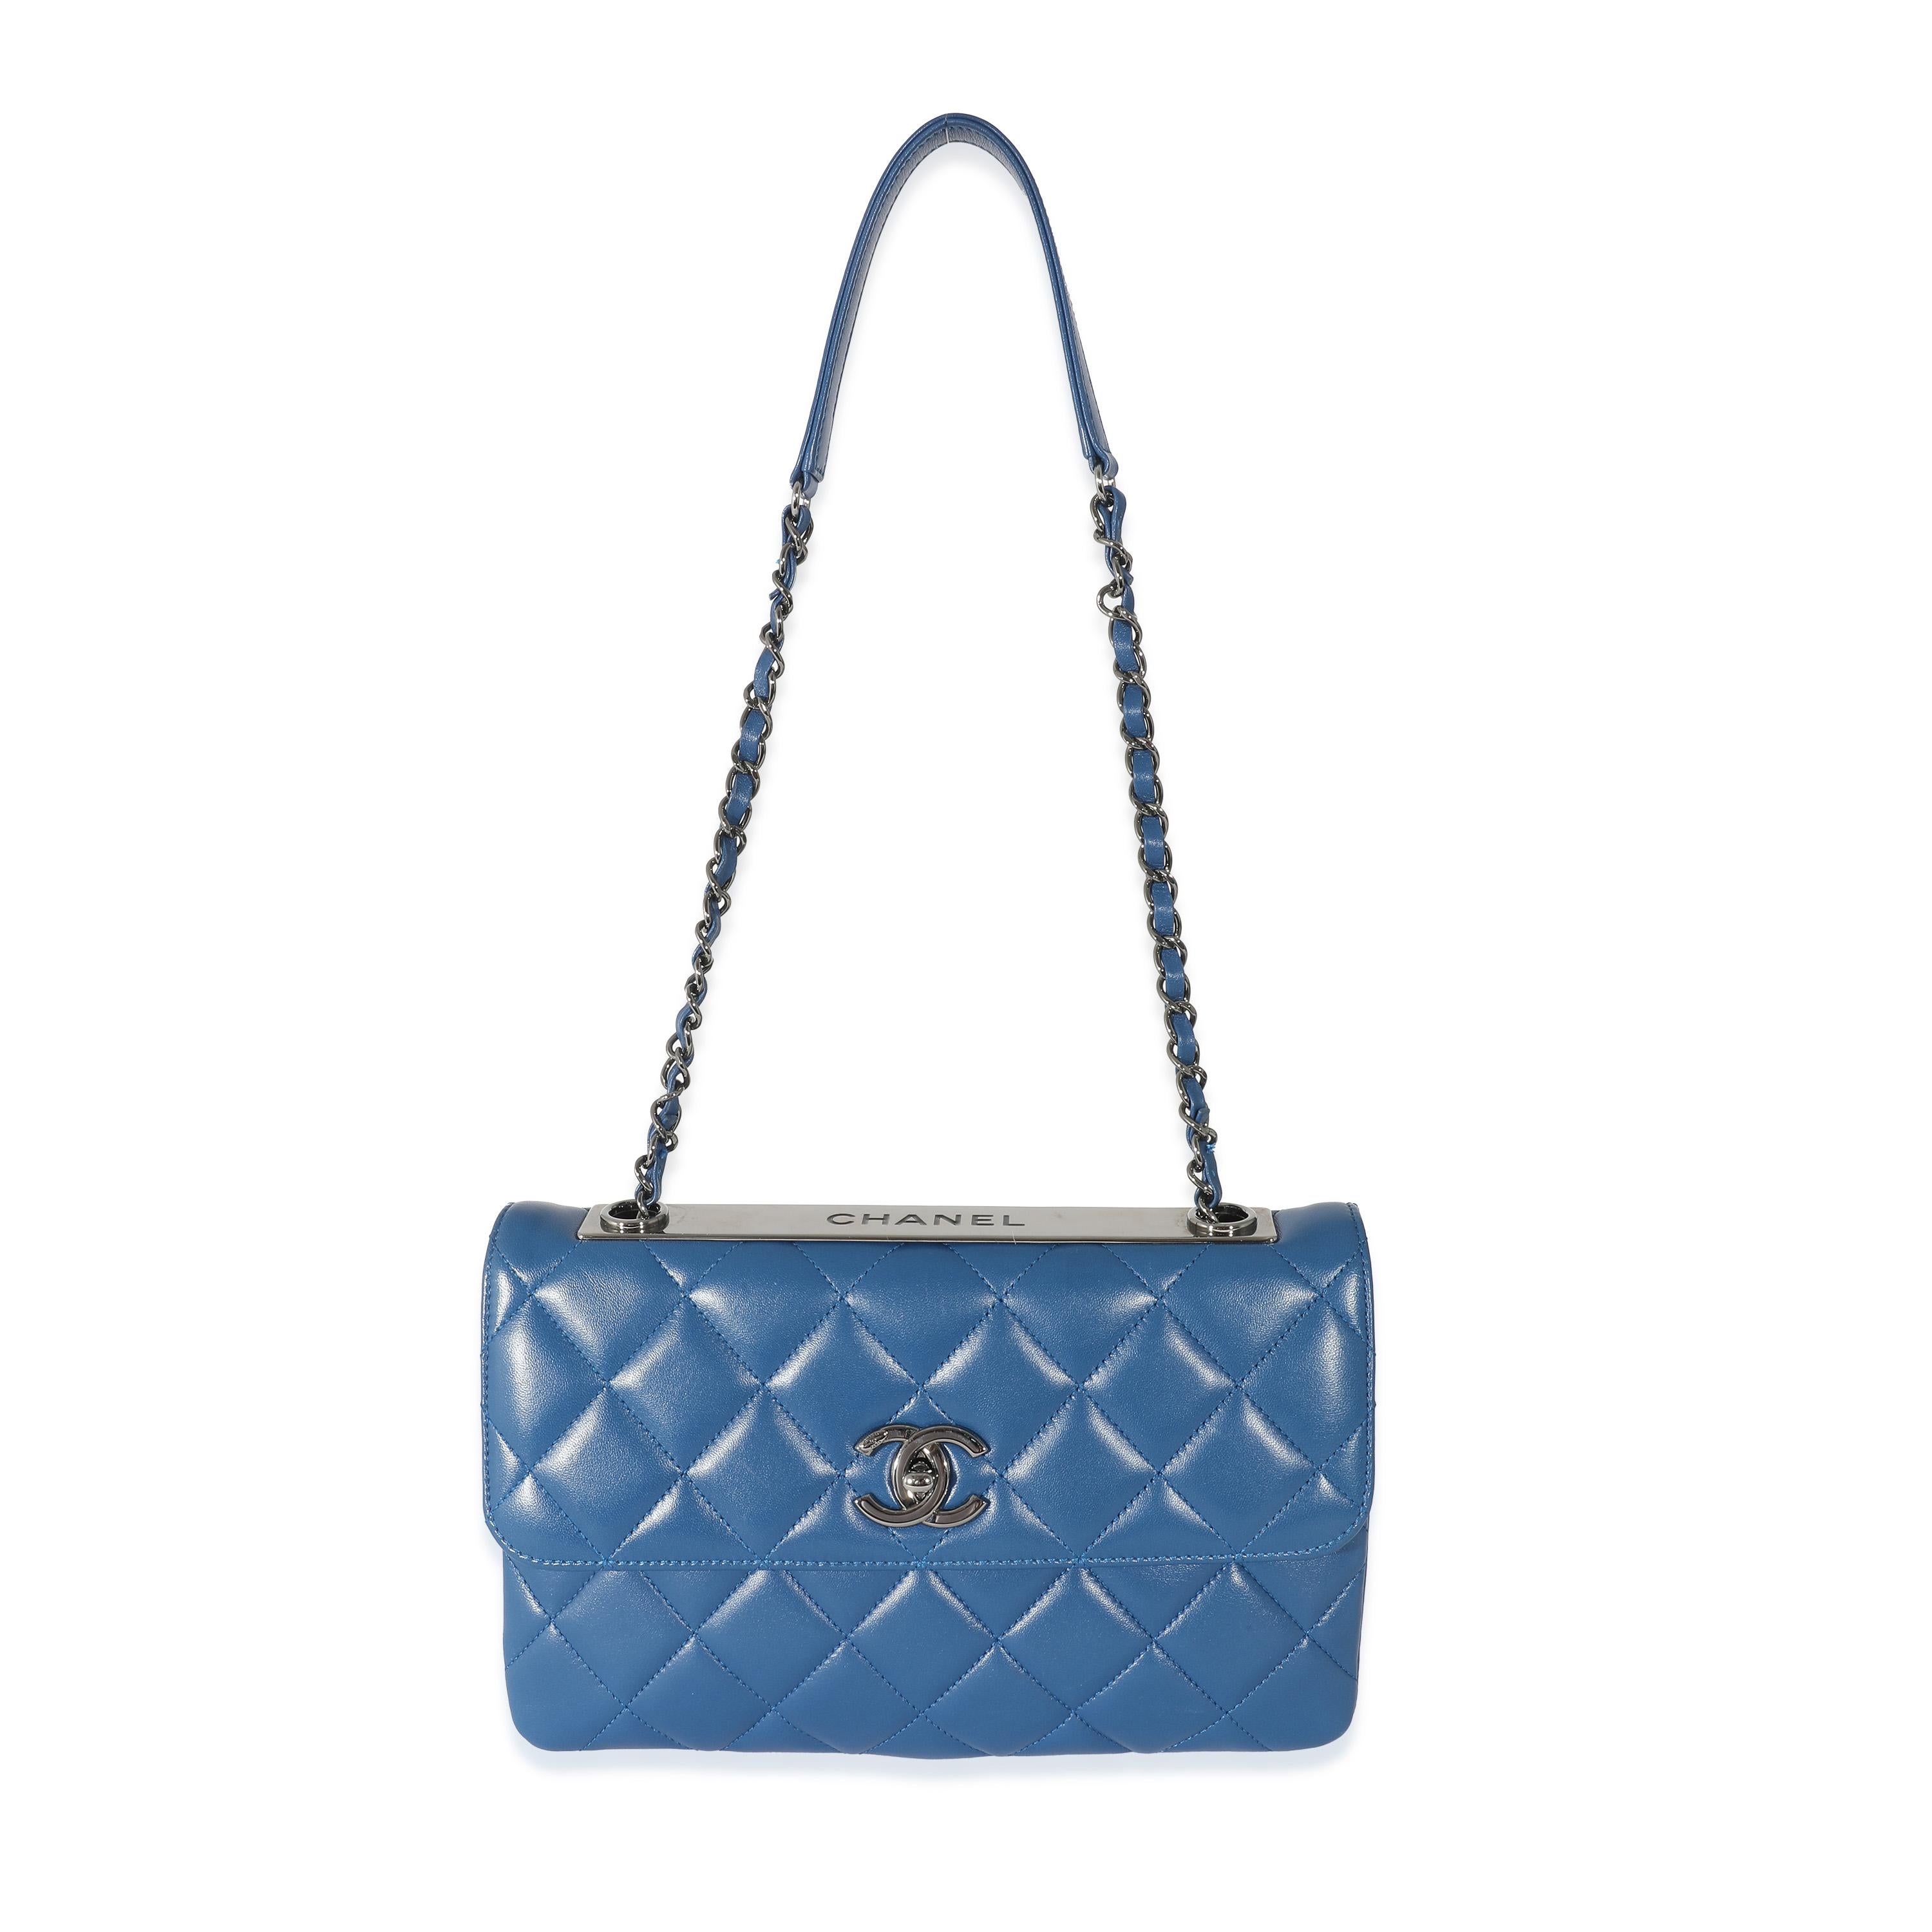 Listing Title: Chanel Navy Quilted Lambskin Medium Trendy CC Flap Bag
SKU: 133503
Condition: Pre-owned 
Handbag Condition: Very Good
Condition Comments: Item is in very good condition with minor signs of wear. Scuffing along corners and throughout